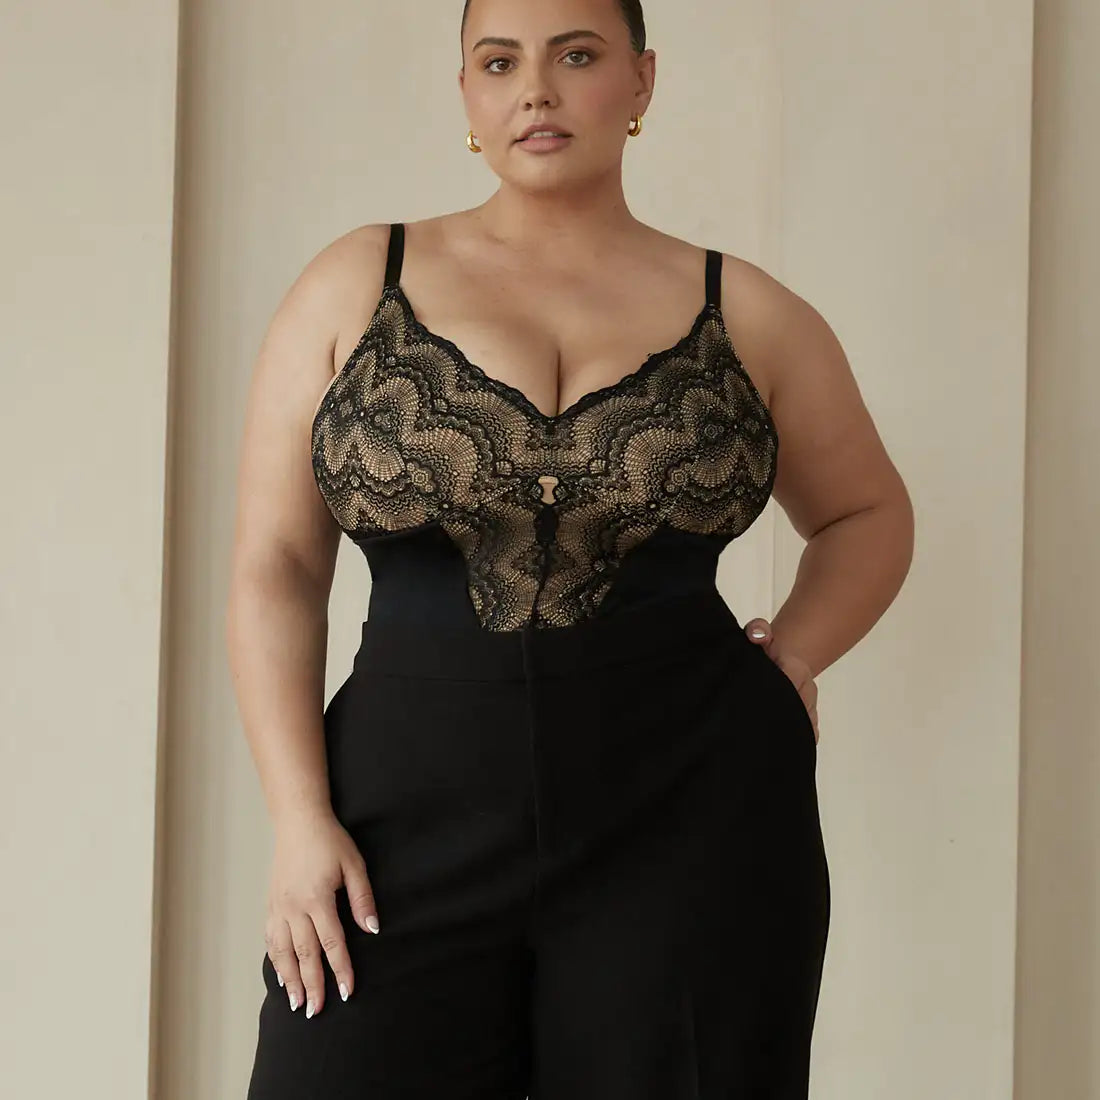 Styling this @shapetasy lace built in shapewear bodysuit into an outfit  idea perfect for date night 🤎 Wearing size XL in the bodysuit